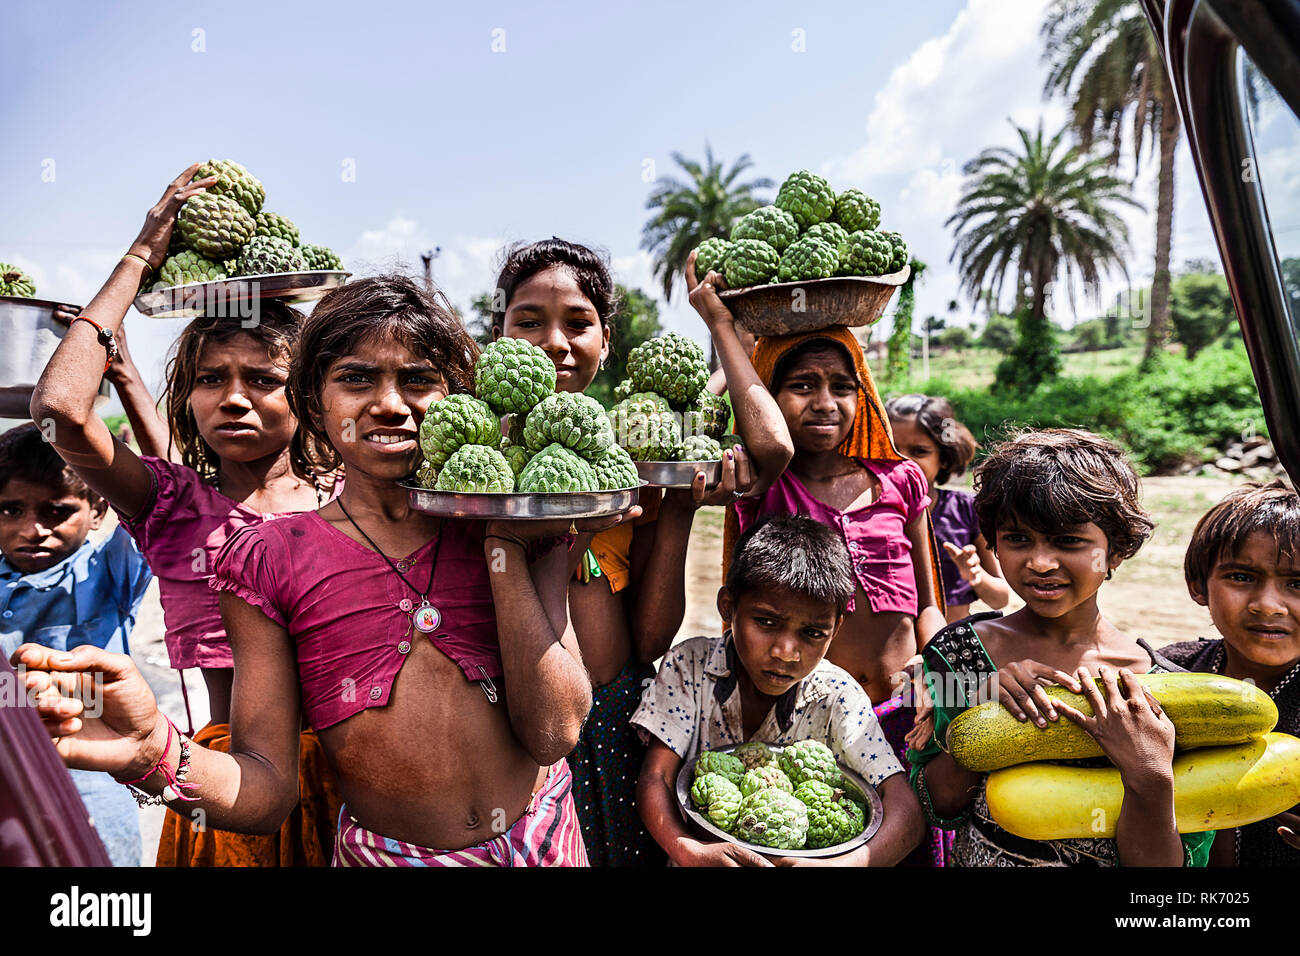 Rajasthani children selling fruits for a living Stock Photo